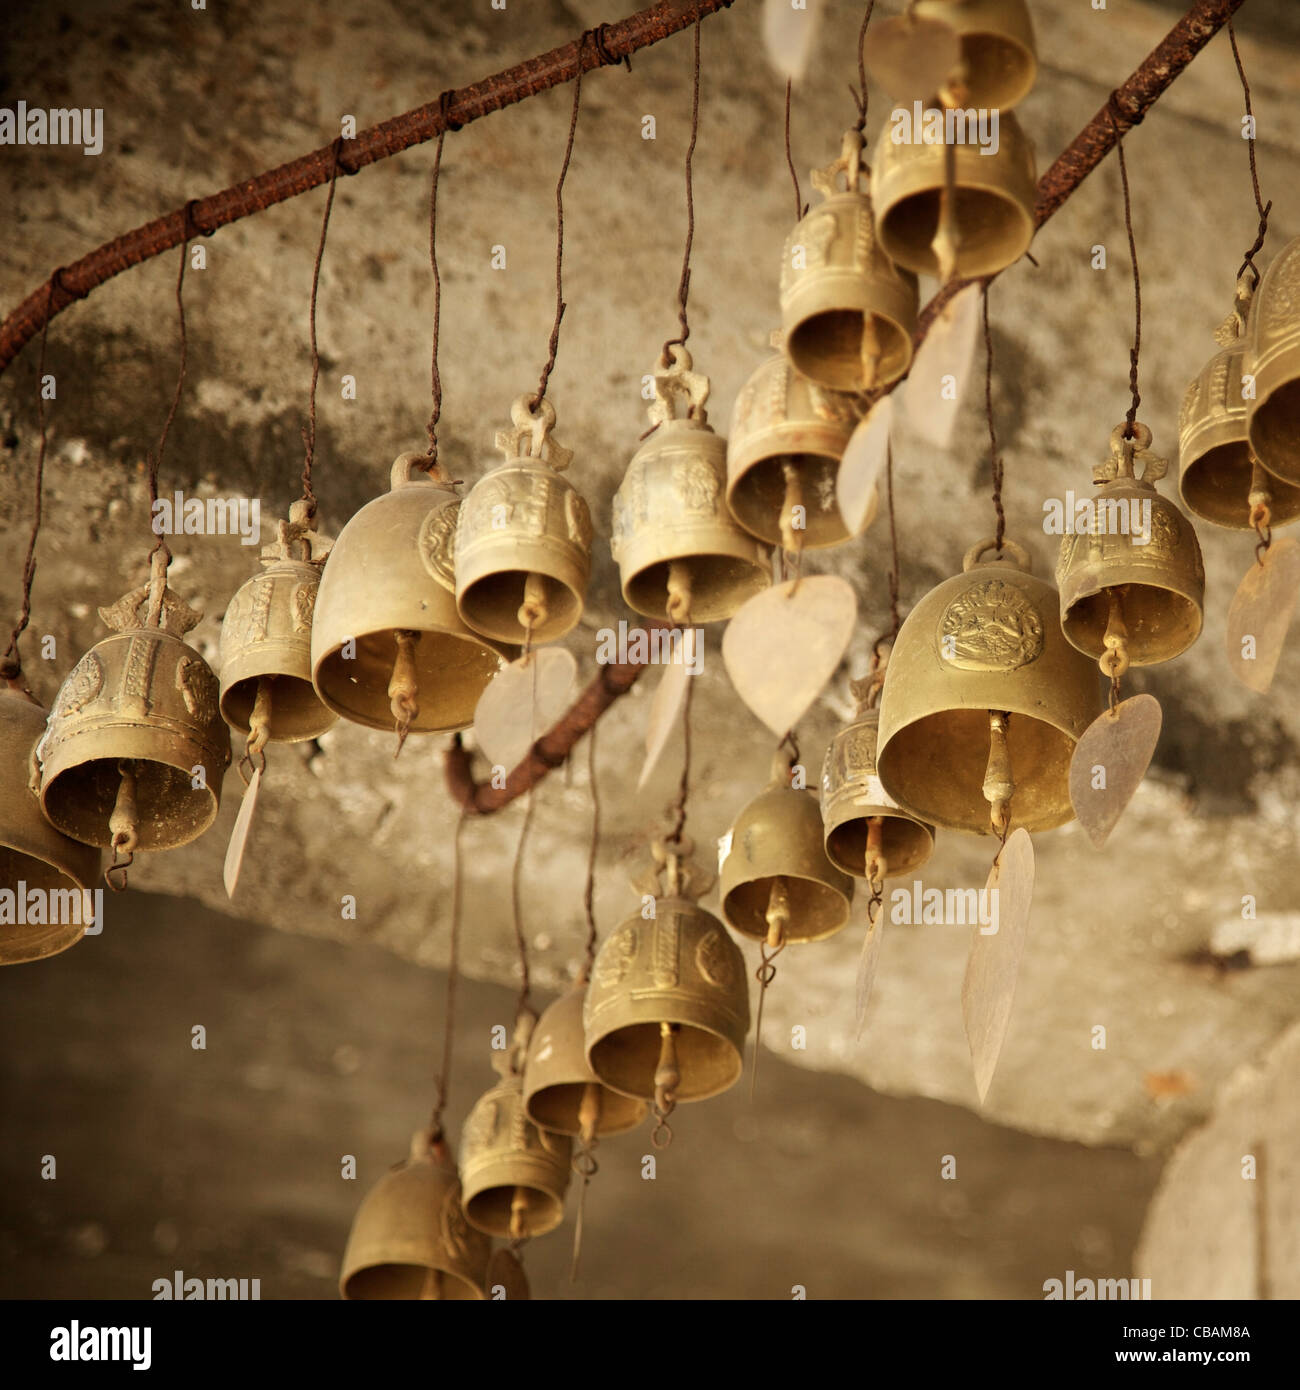 Bells inside the buddhist monastery. Square composition. Stock Photo